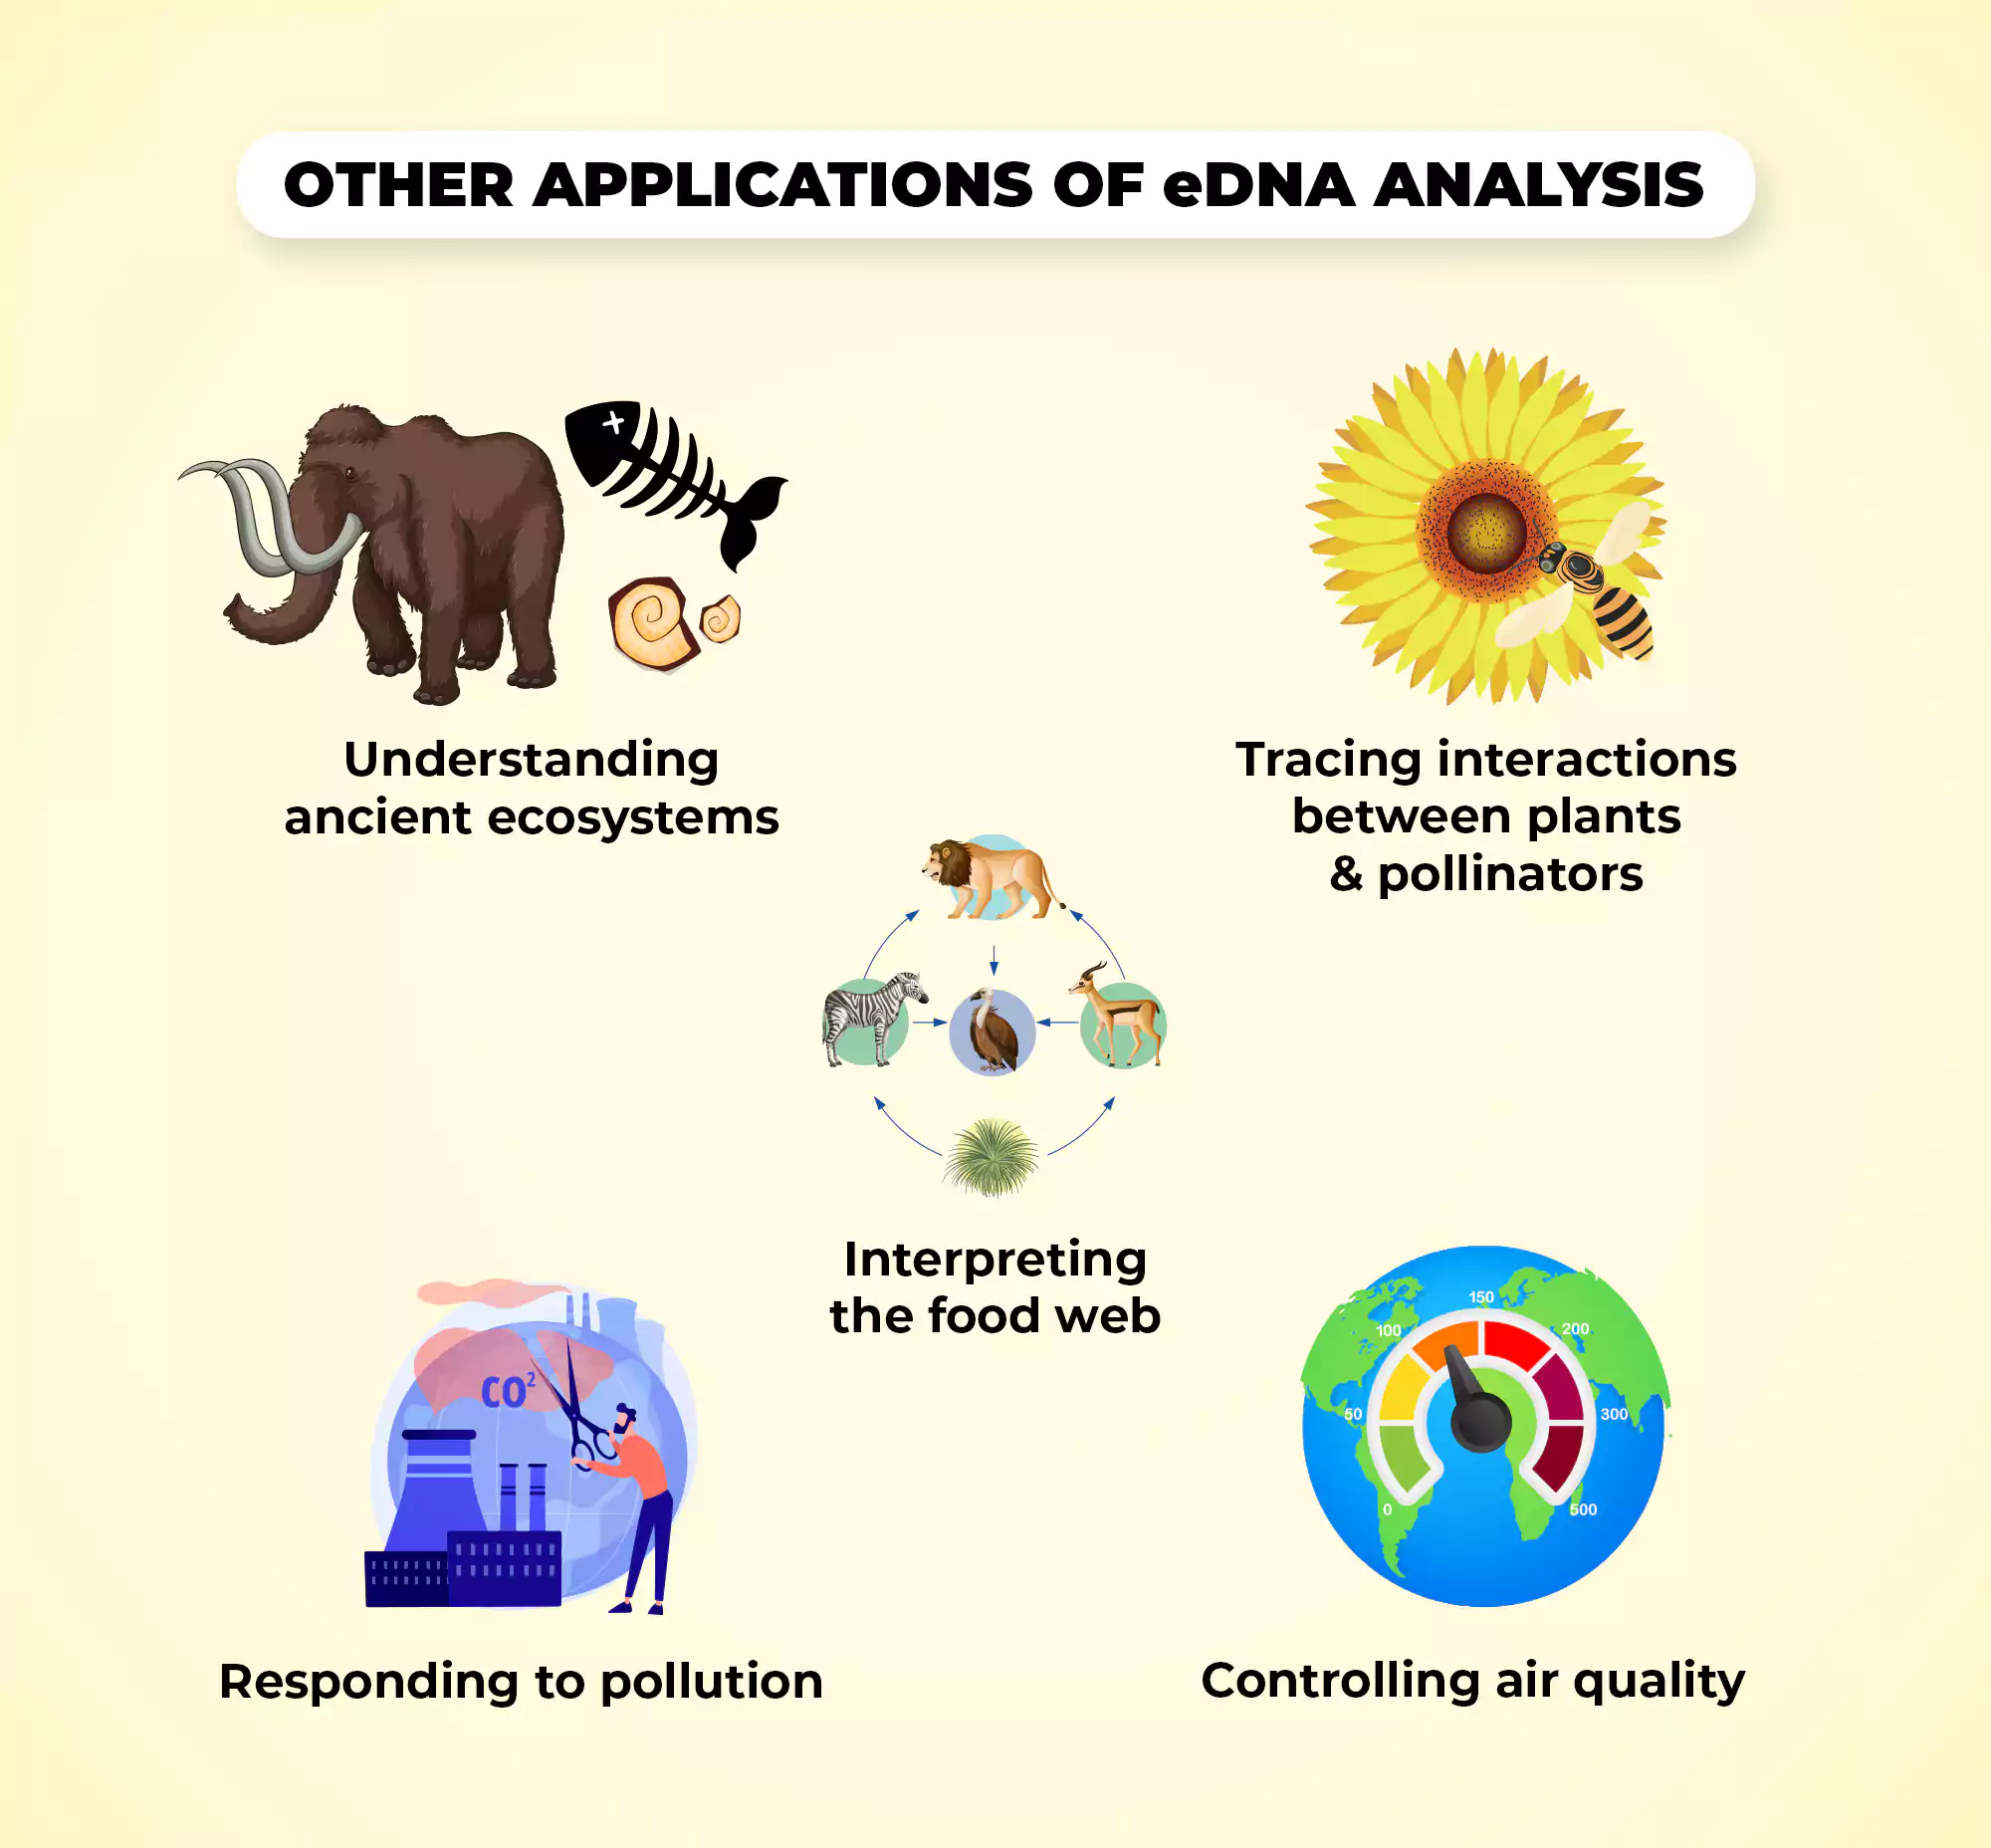 Other applications of eDNA